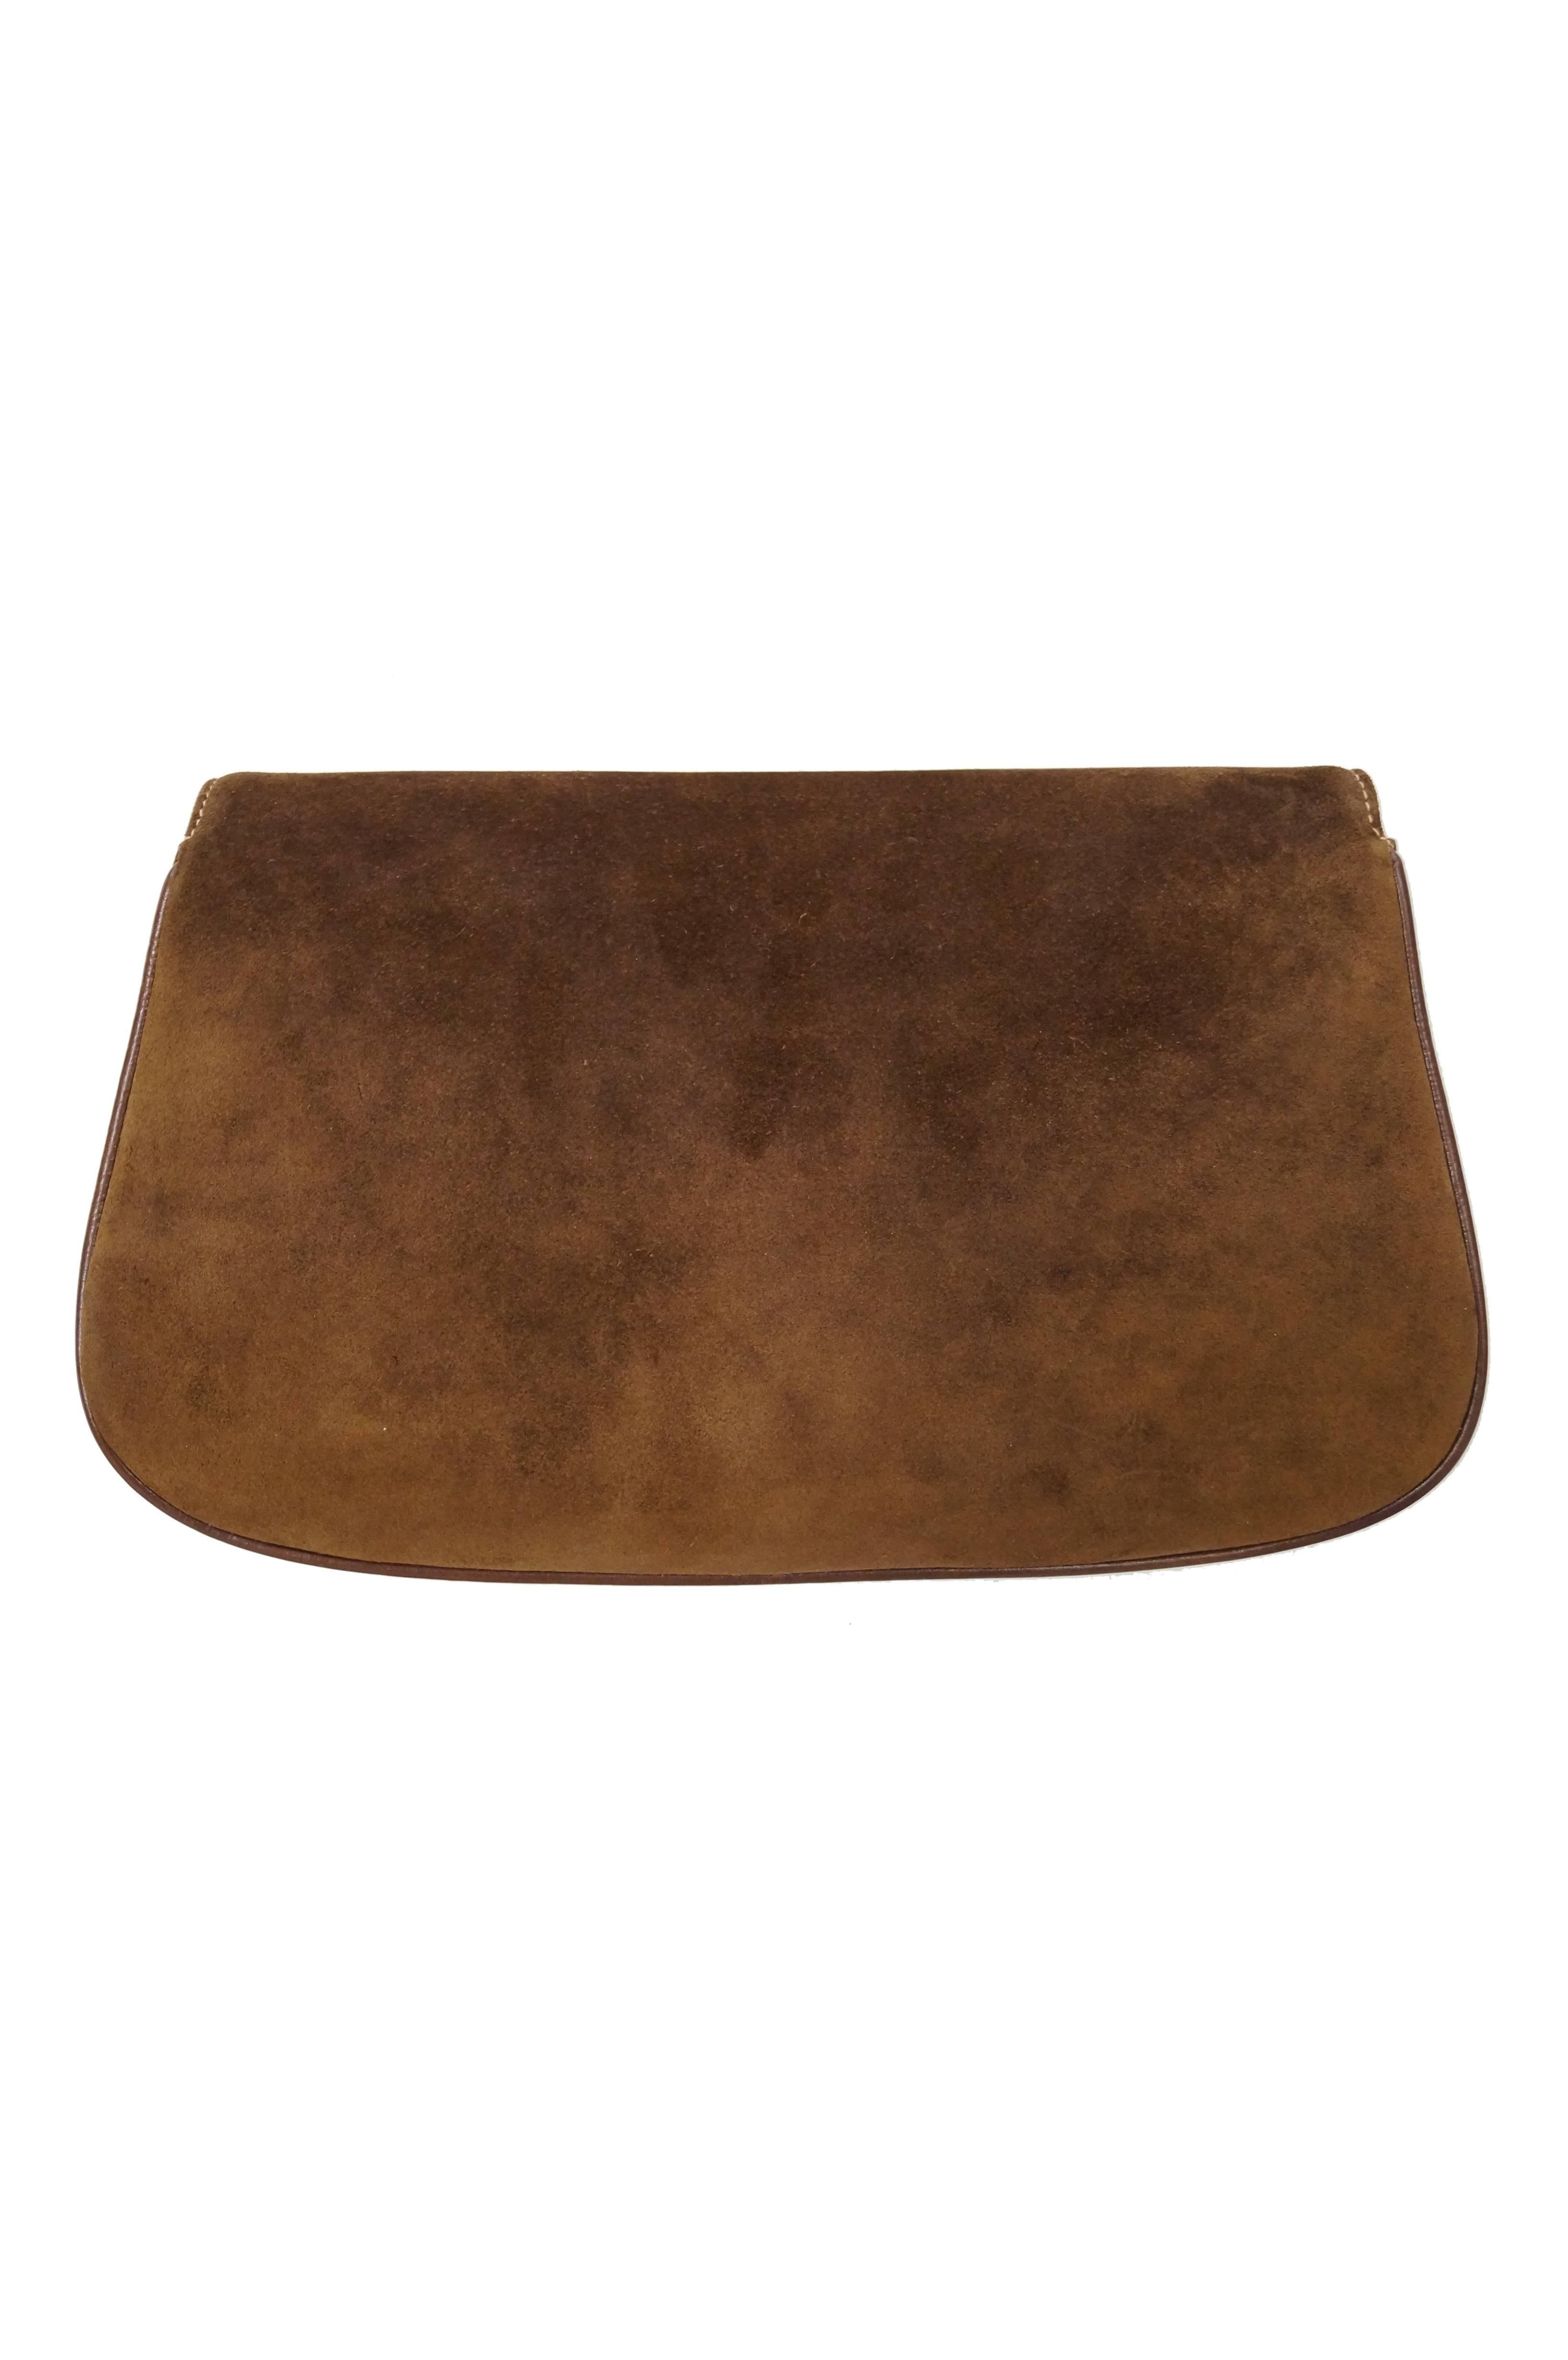 Iconic 1970s Gucci Brown Italian Suede and Leather Clutch 2